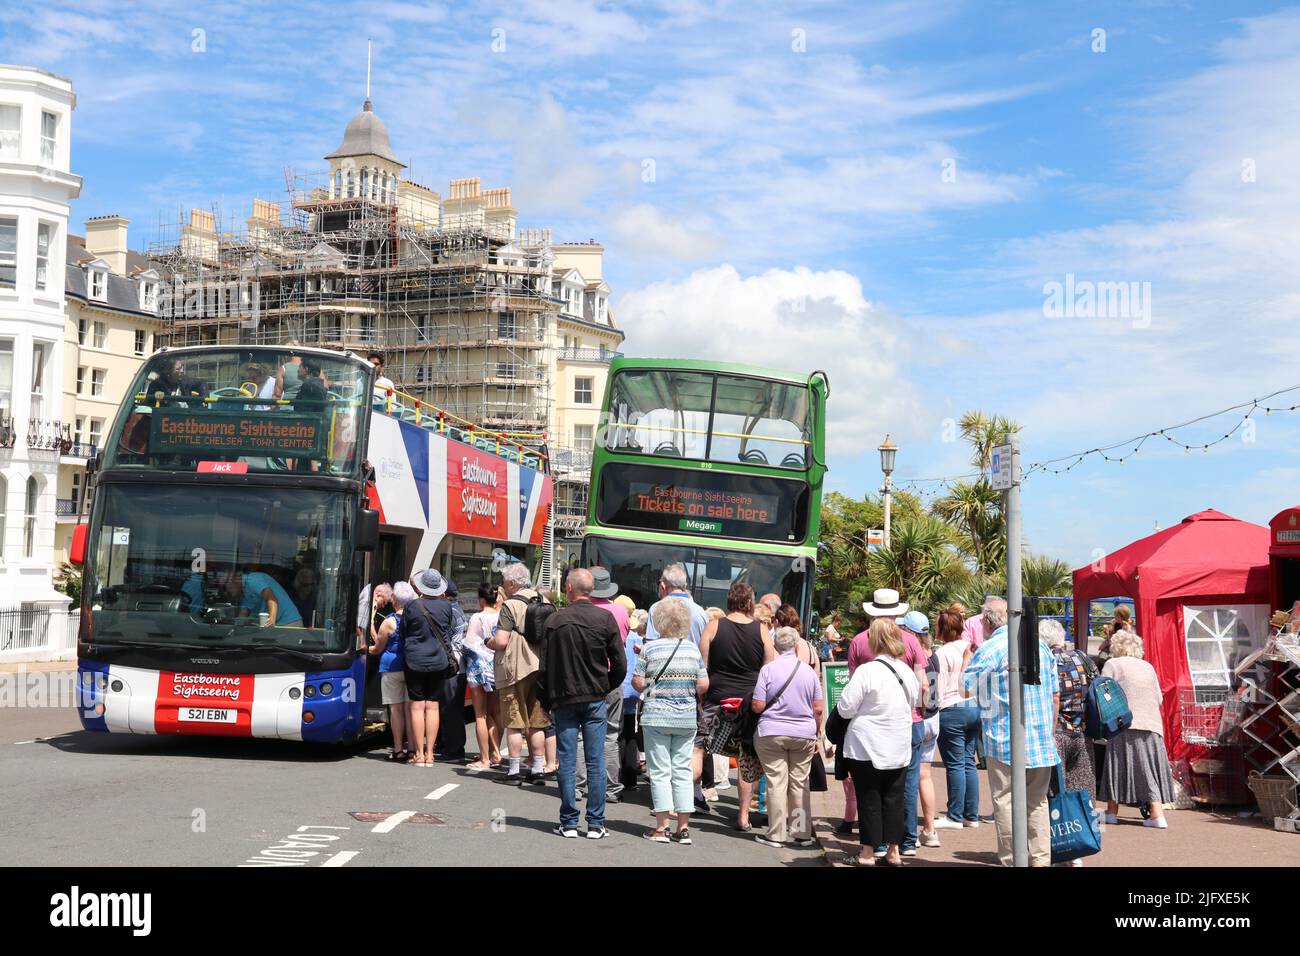 PASSENGERS QUEUE FOR SIGHTSEEING TOUR BUSES IN EASTBOURNE Stock Photo